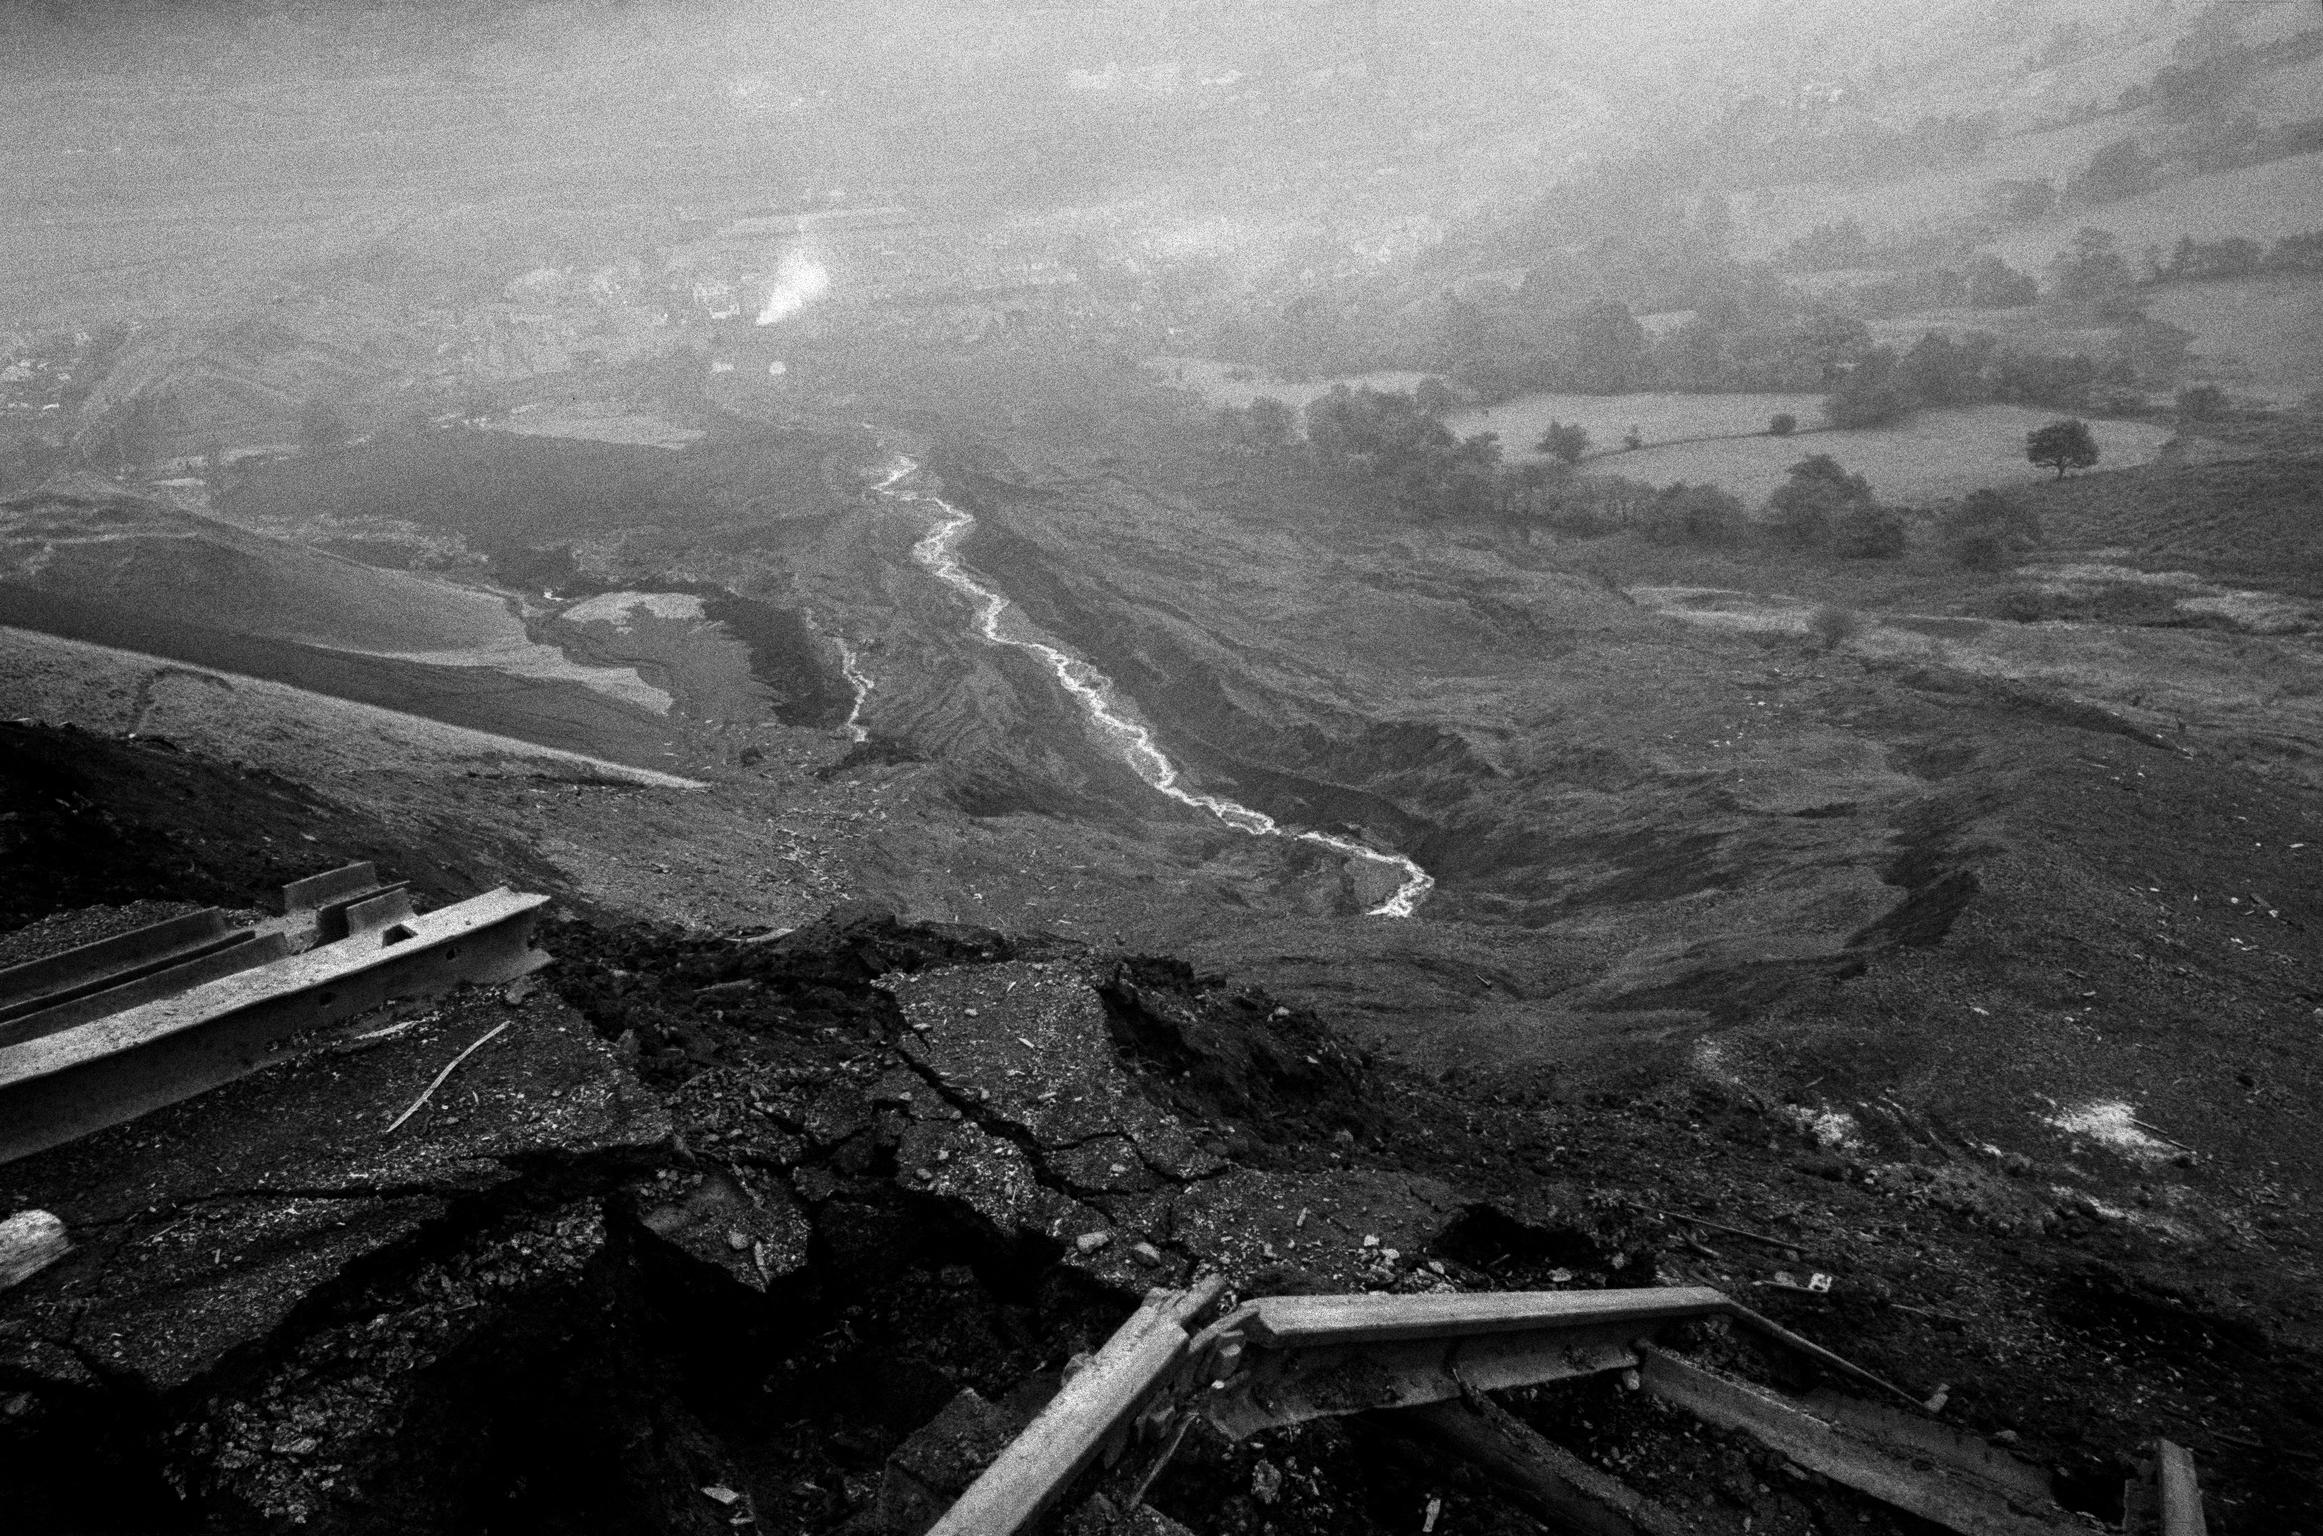 The Aberfan disaster was a catastrophic collapse of a colliery spoil in the Welsh village of Aberfan